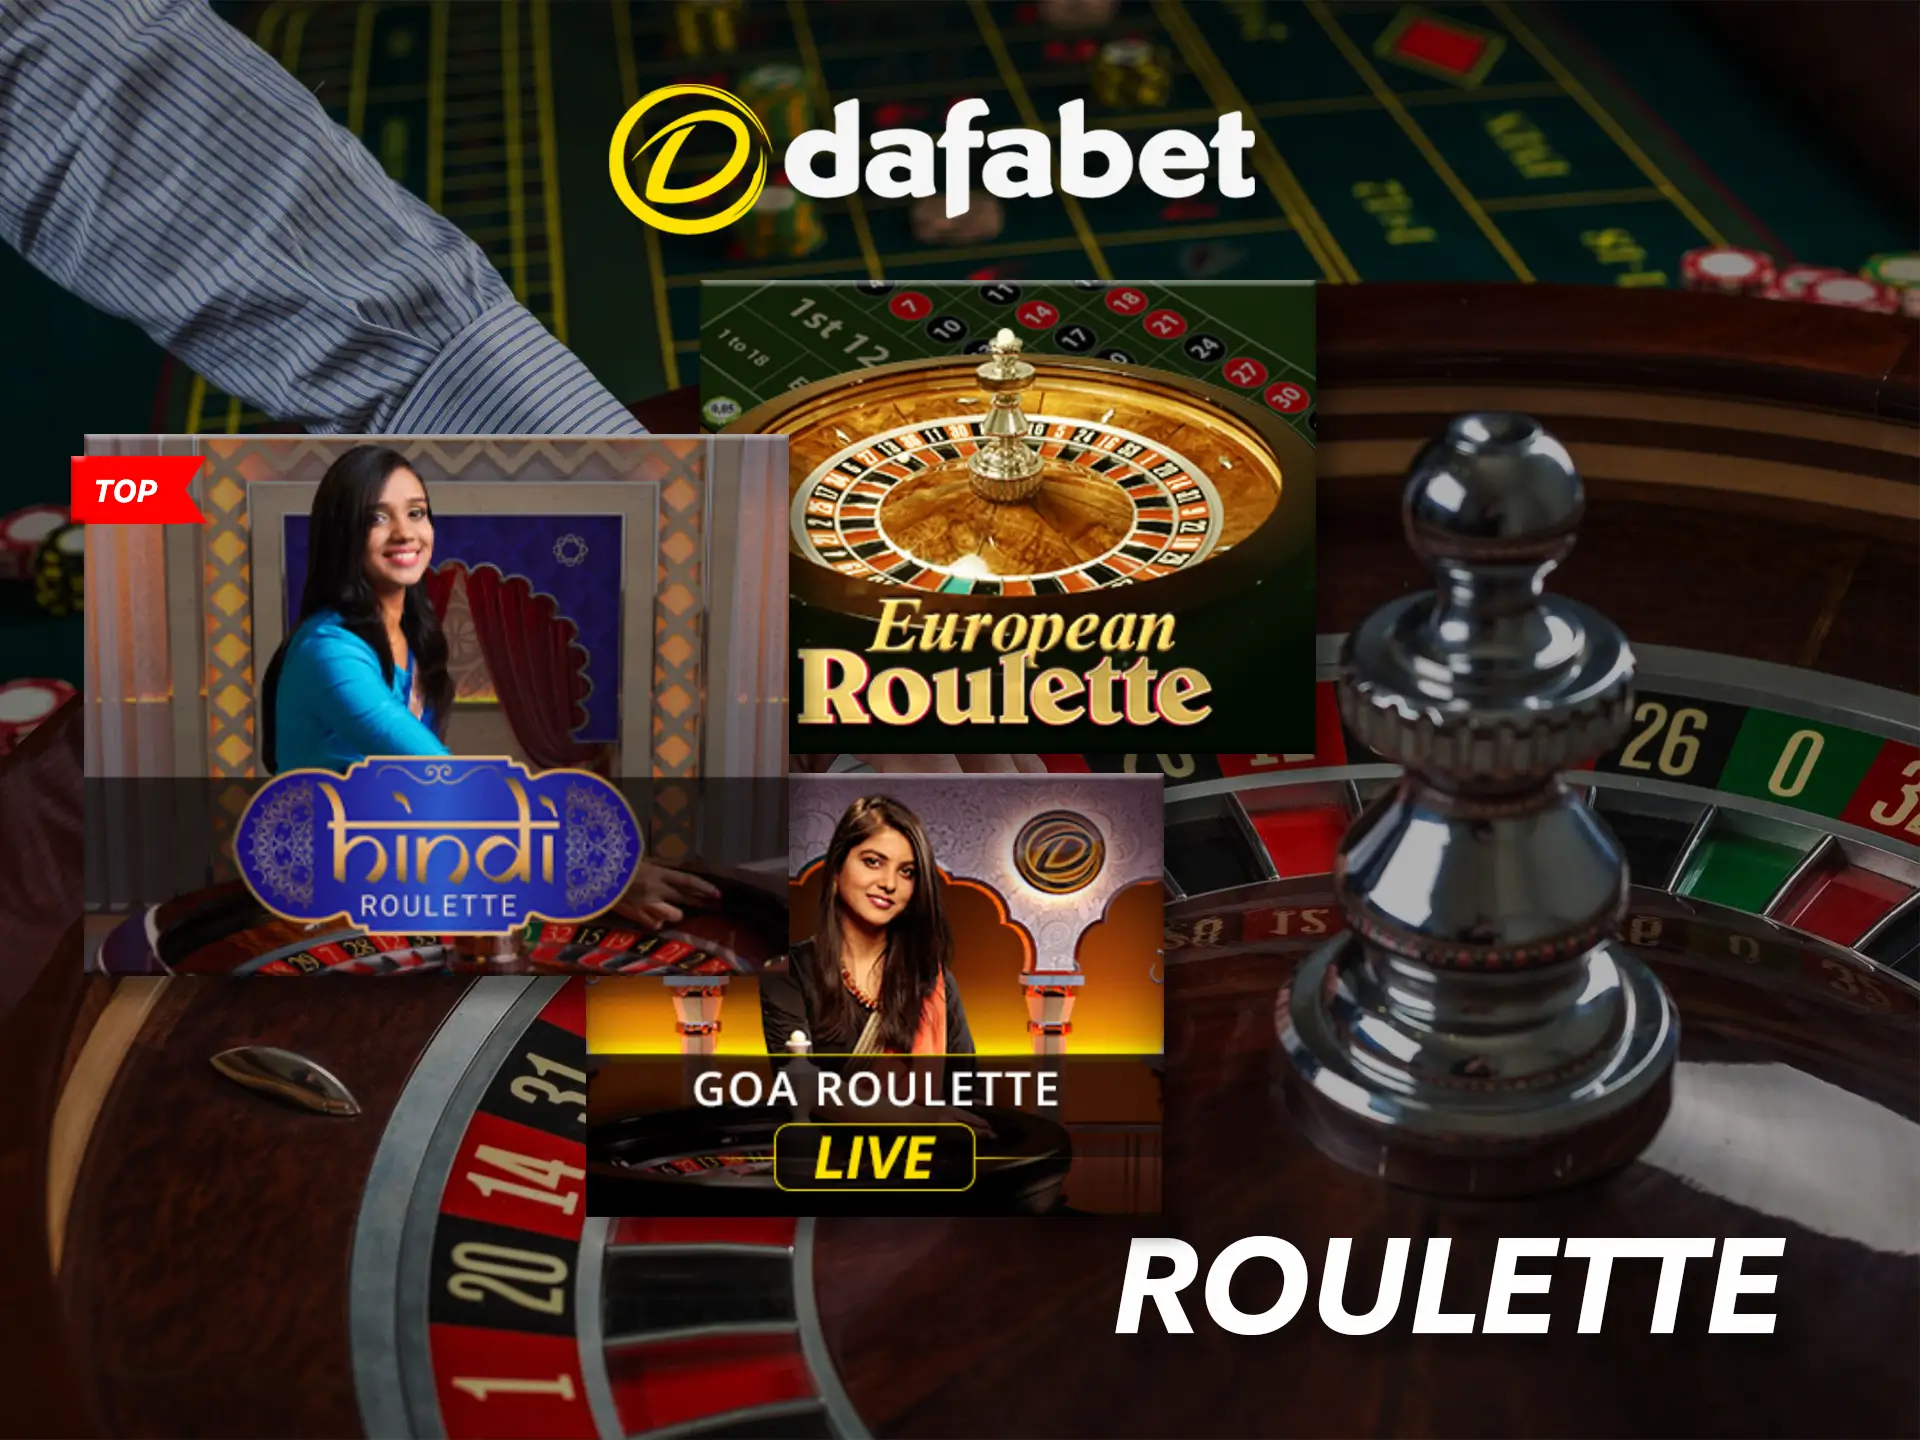 Try your luck at roulette from Dafabet casino.